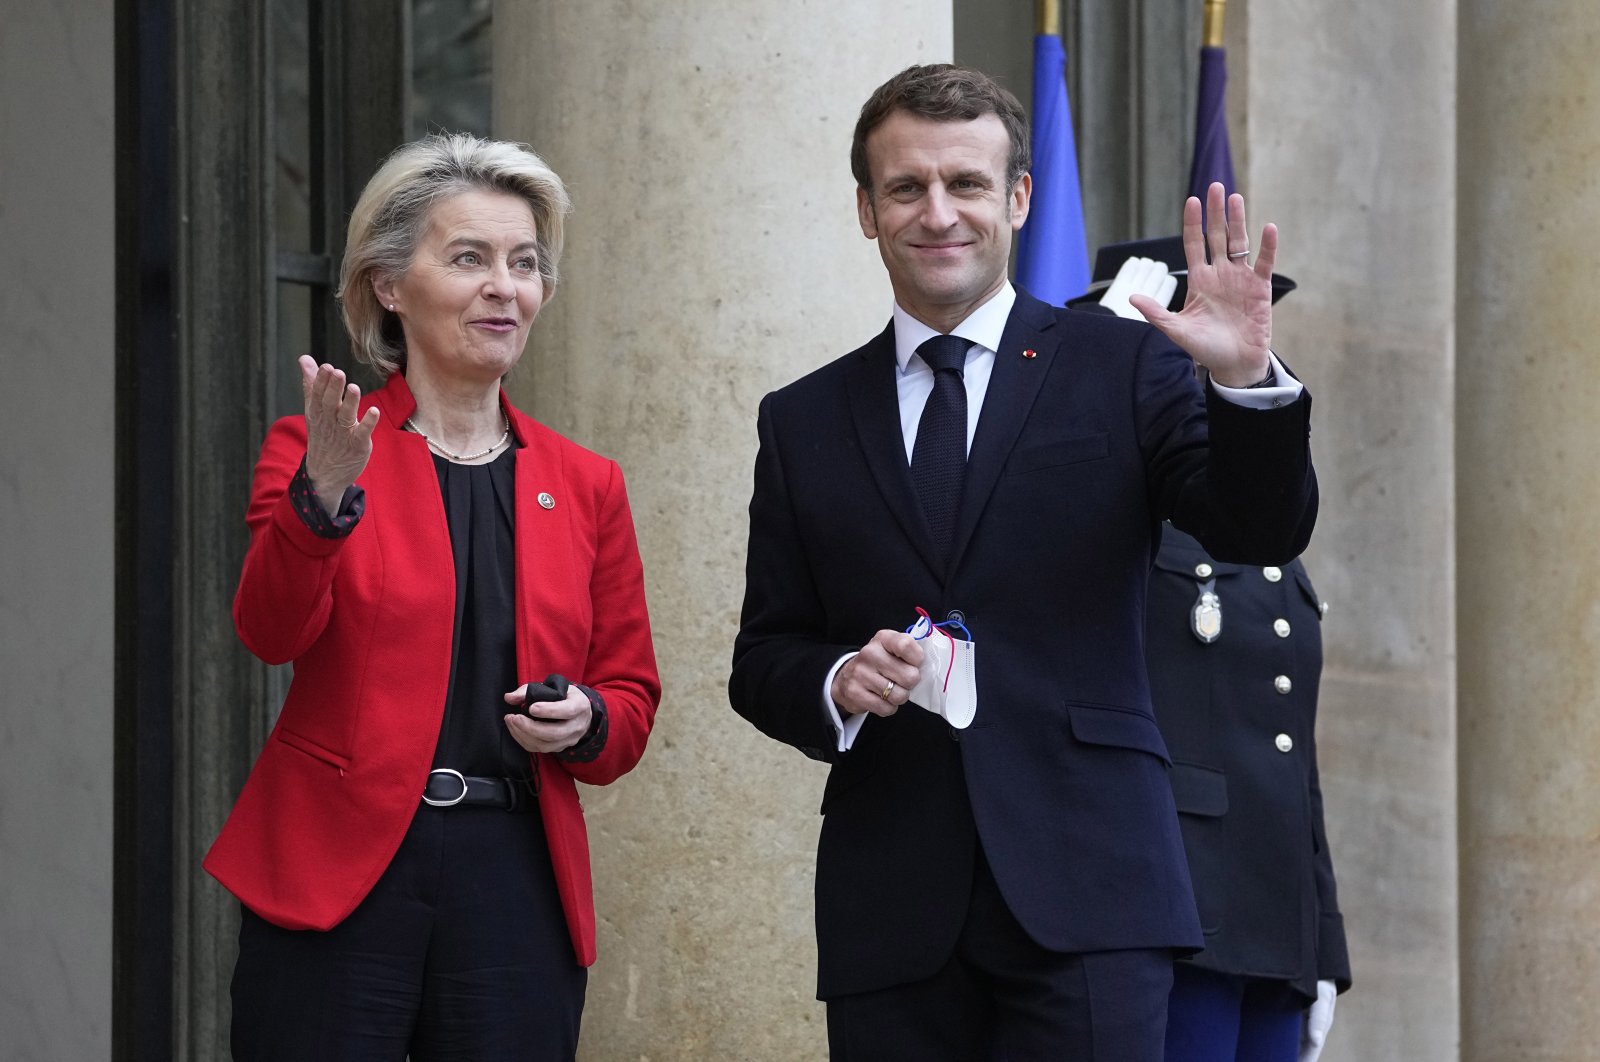 French President Emmanuel Macron (R) waves as he greets European Commission President Ursula von der Leyen at the Elysee Palace in Paris, France, Jan. 7, 2022. (AP Photo)